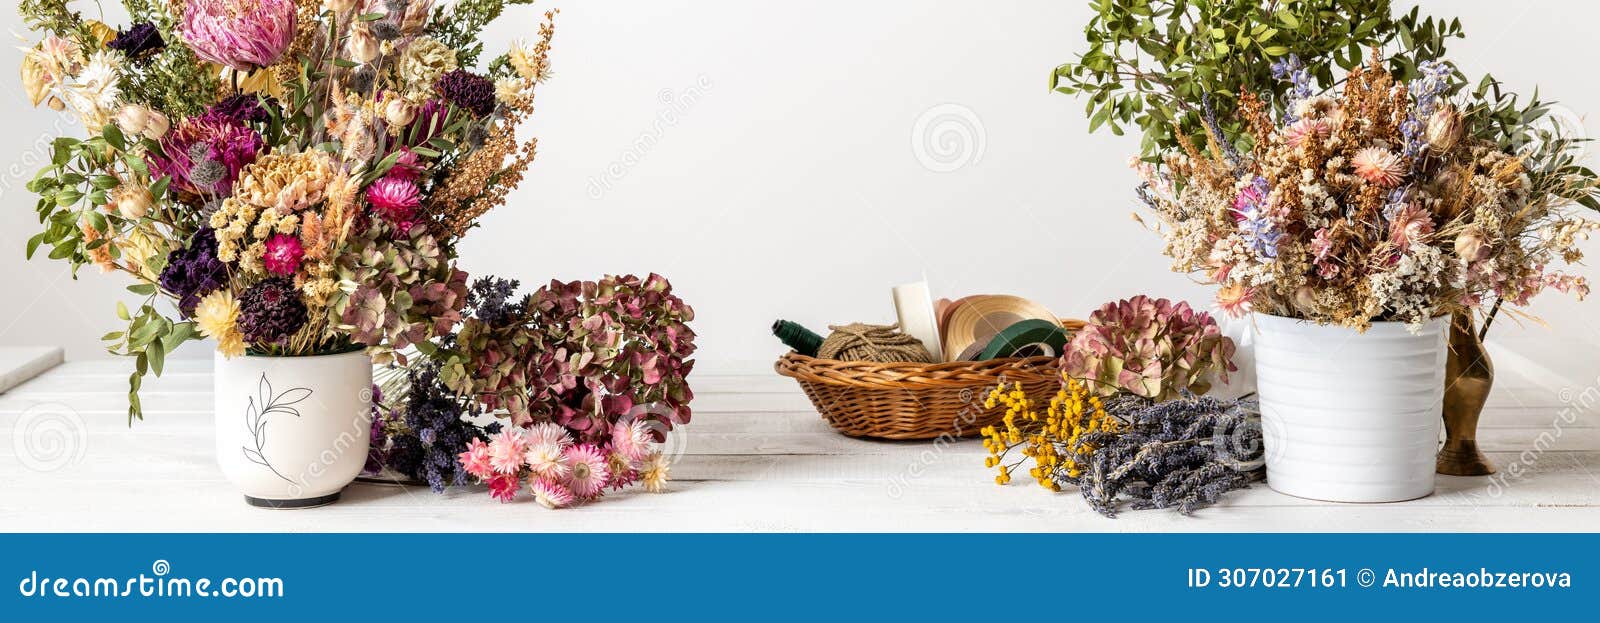 dried flowers banner. arranging dried flowers into a beautiful bouquet. sustainable floristry.